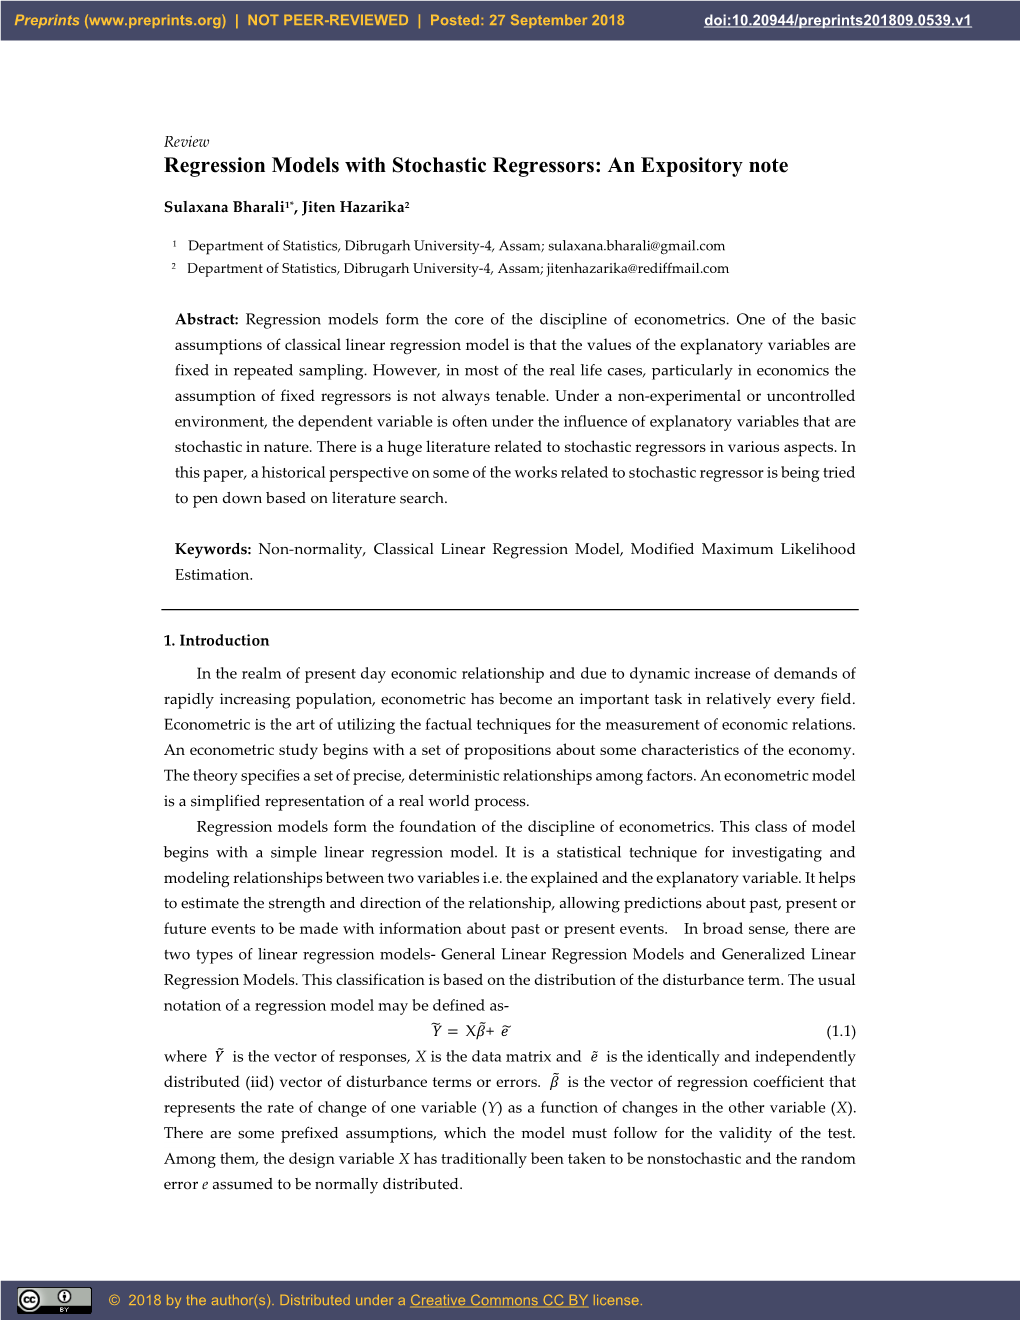 Regression Models with Stochastic Regressors: an Expository Note